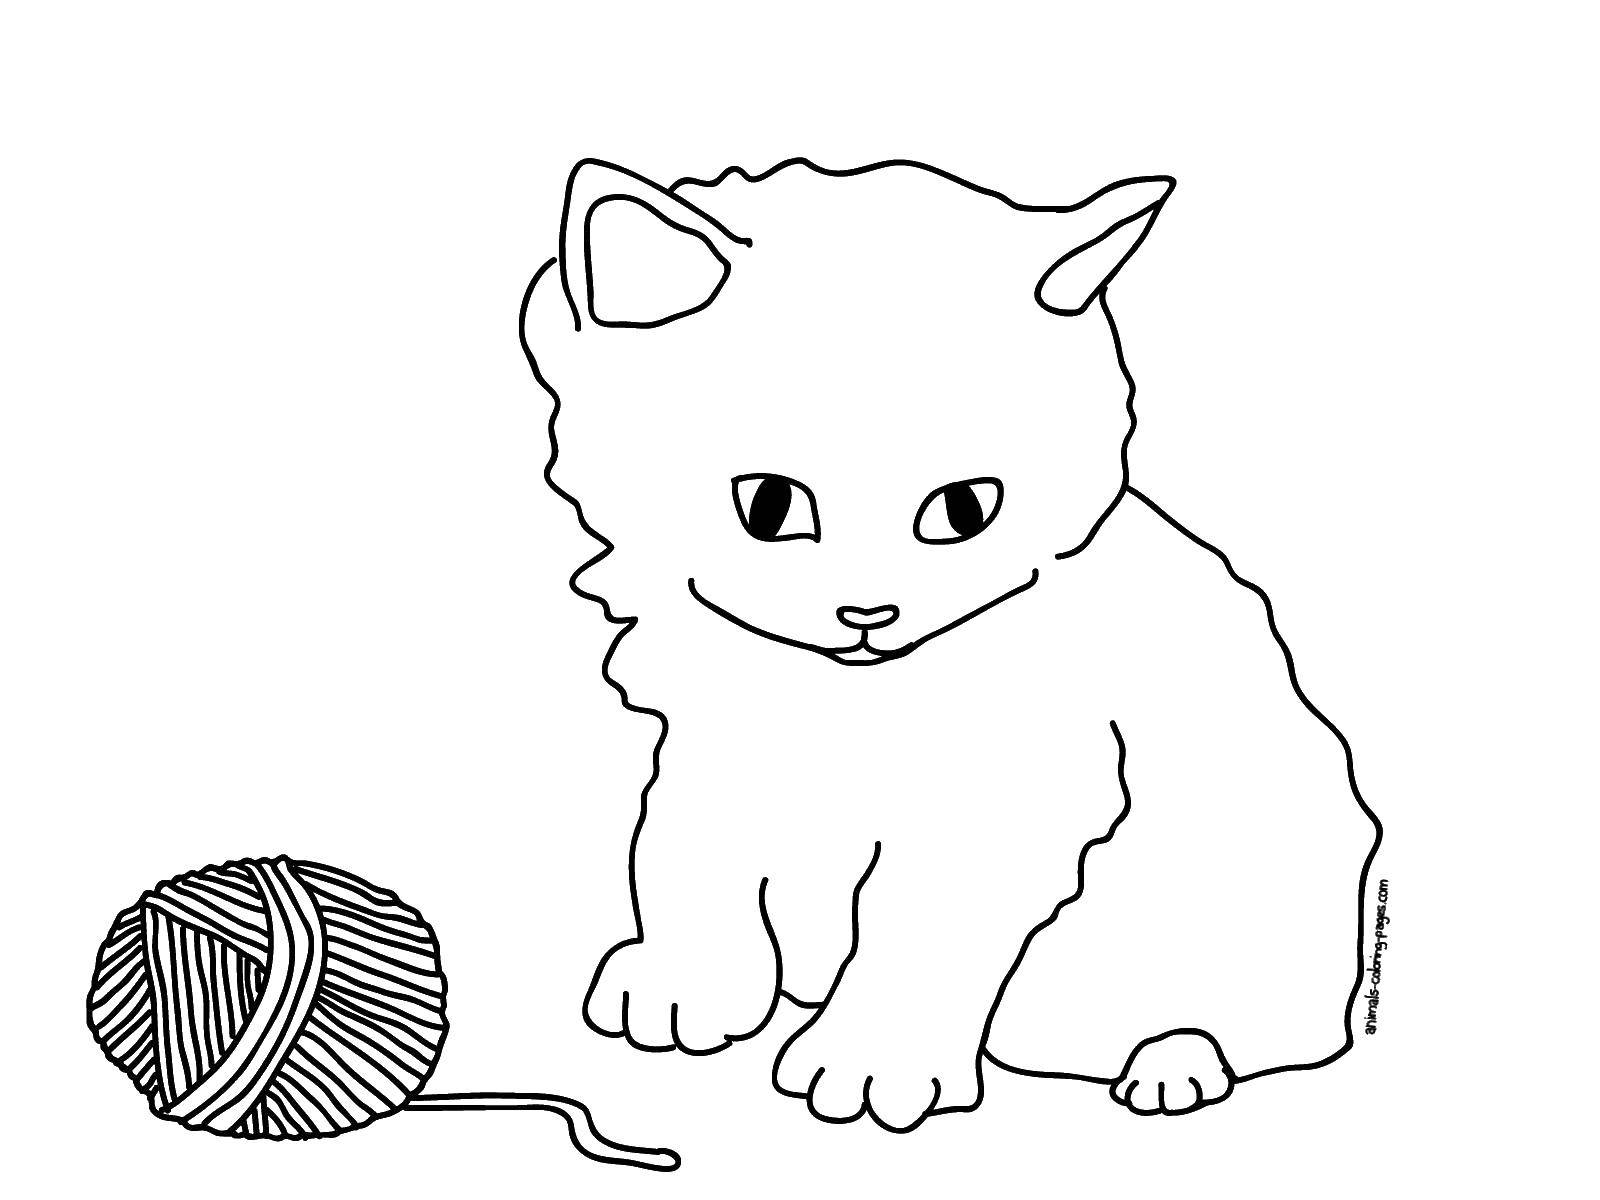 Coloring A kitten with a ball. Category Cats and kittens. Tags:  animals, kitten.